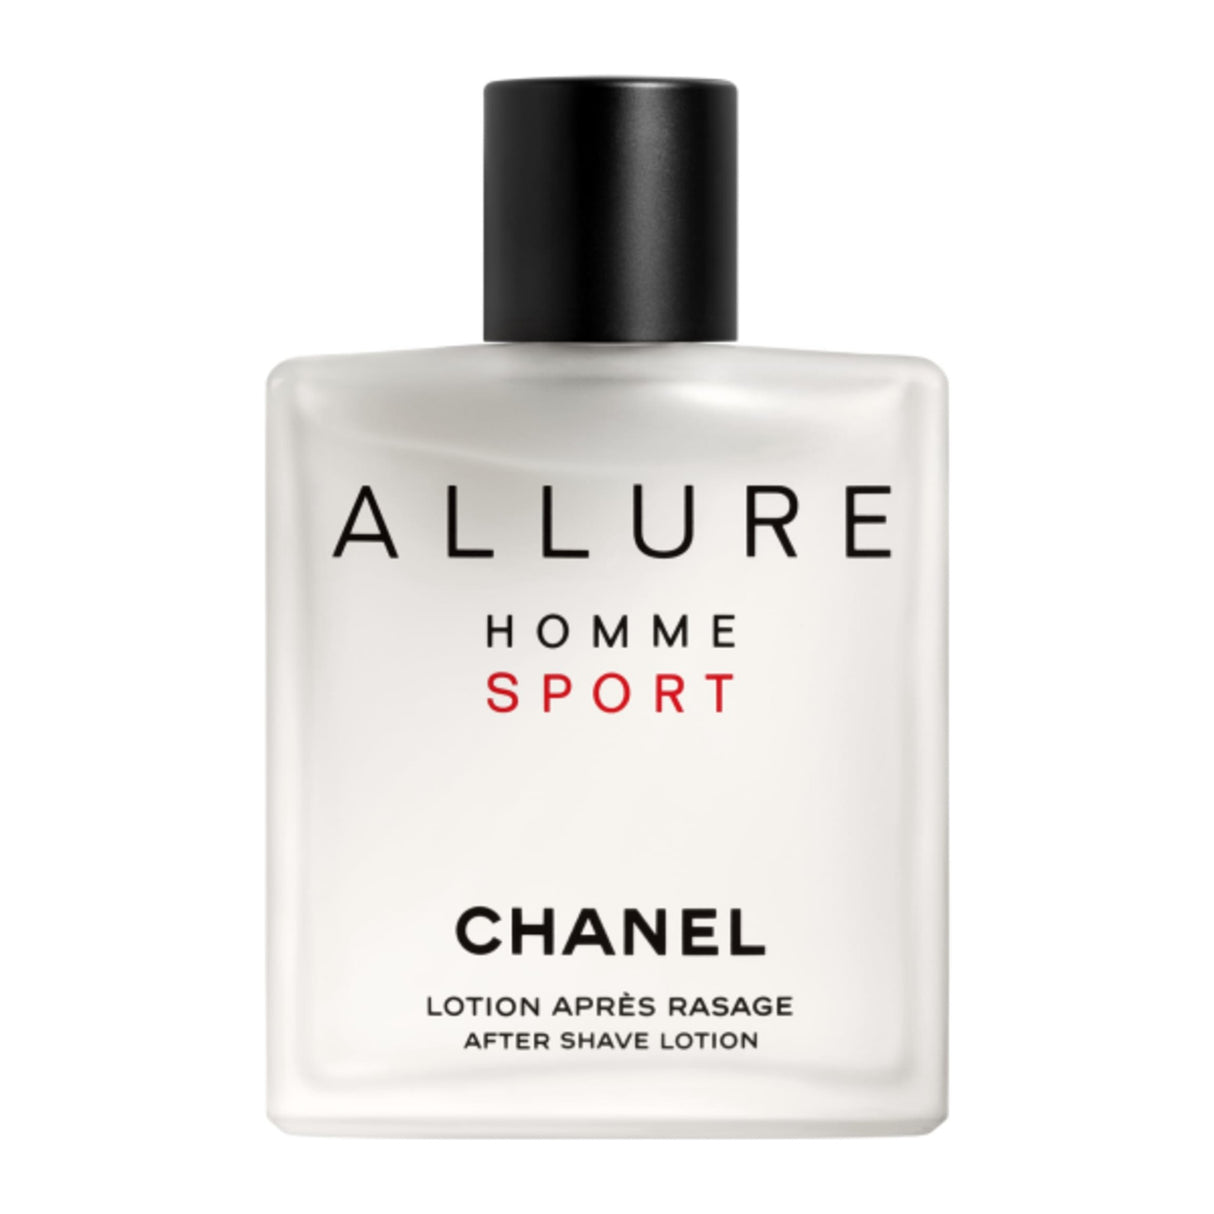 Allure Homme Sport Aftershave Lotion